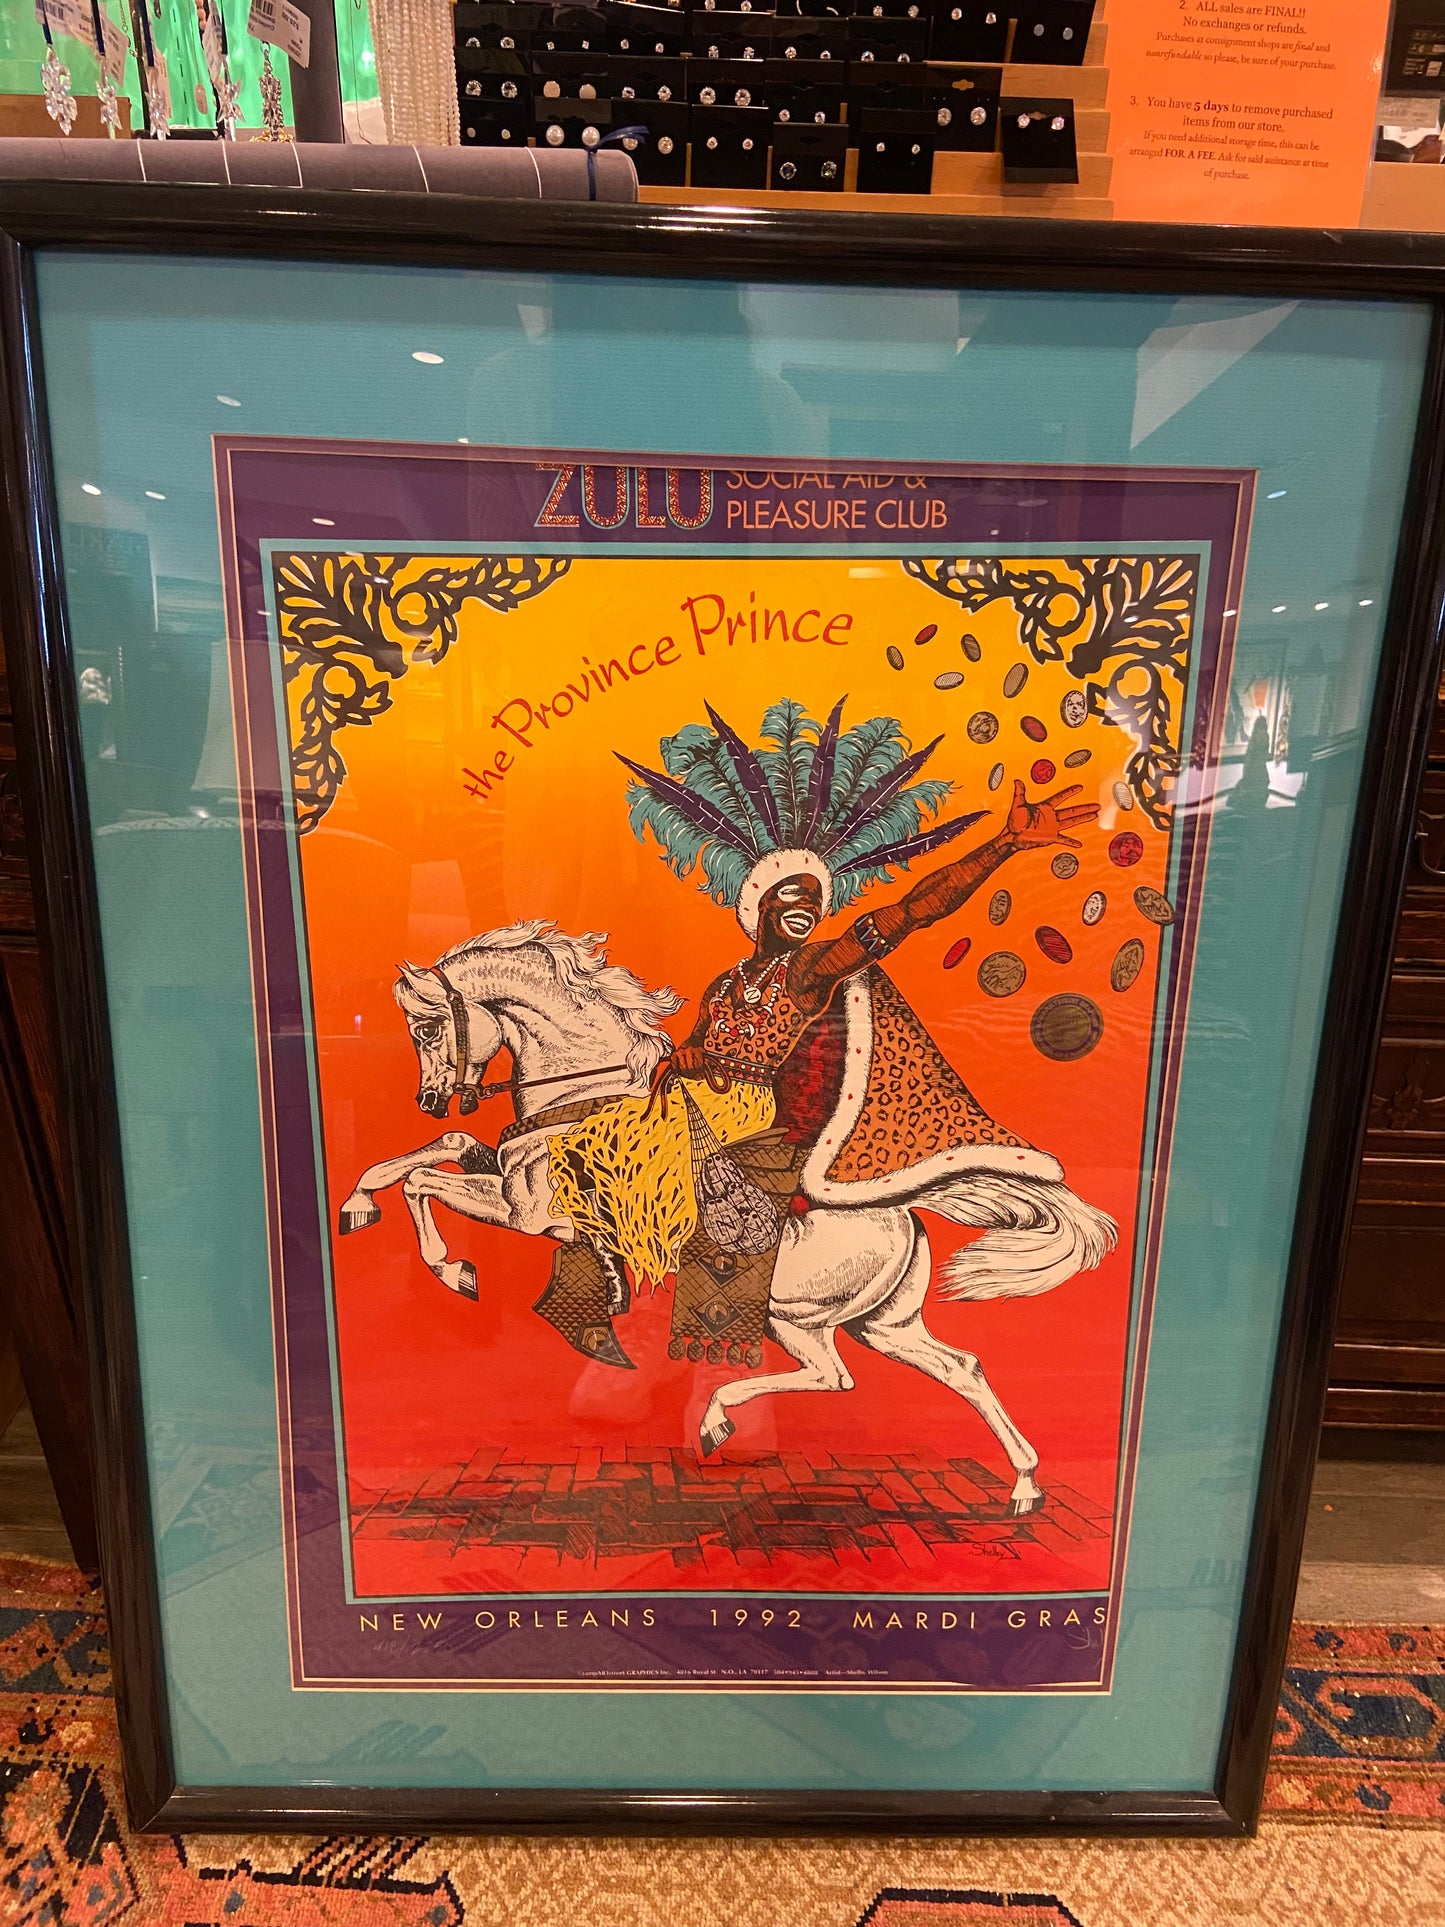 Zulu Social and Pleasure Club Limited Edition Poster "Province Prince" (25031)